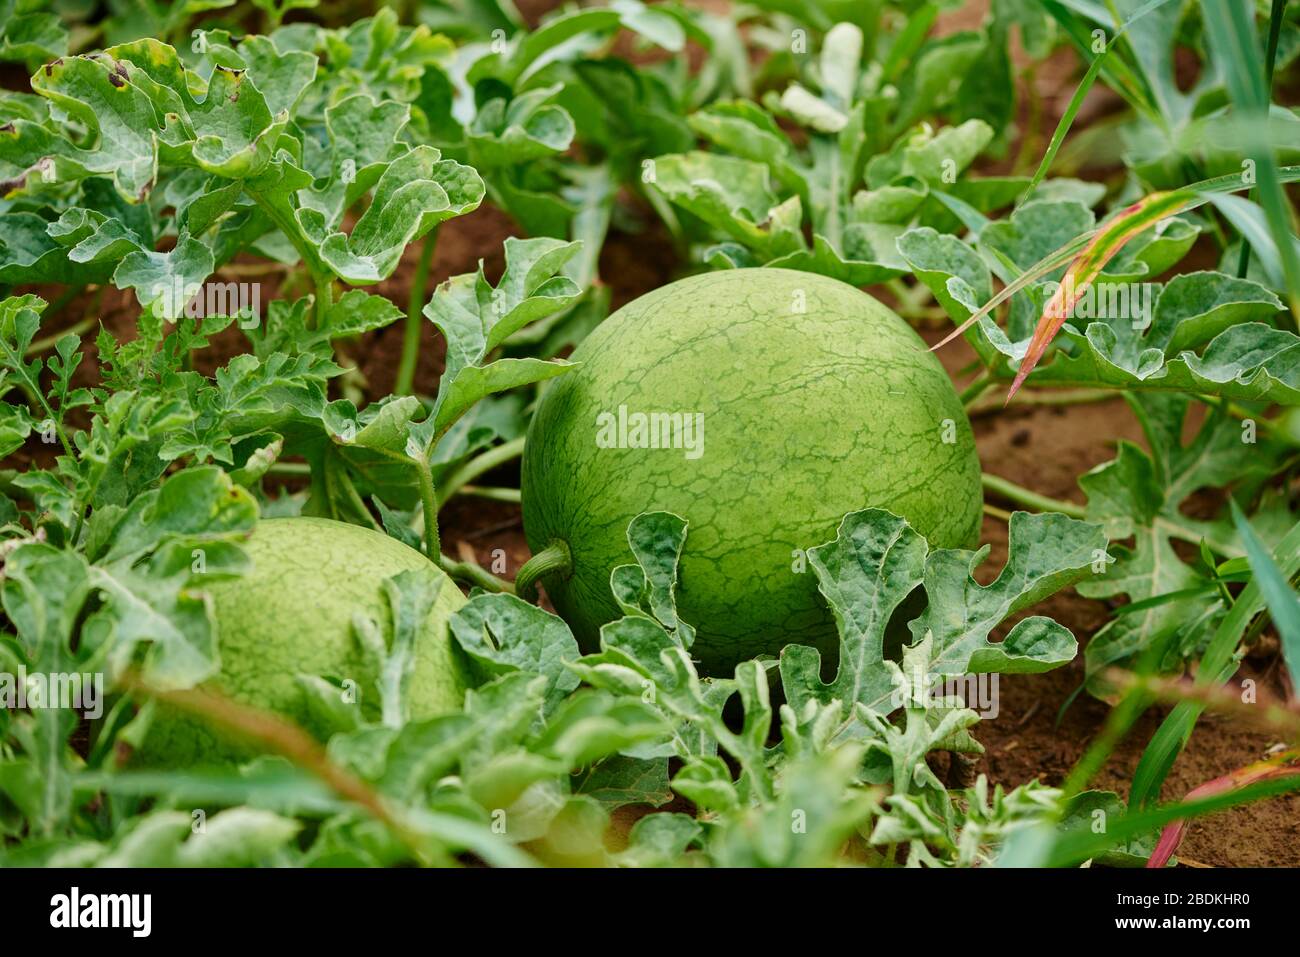 Watermelon (Citrullus lanatus) in bed, Germany Stock Photo